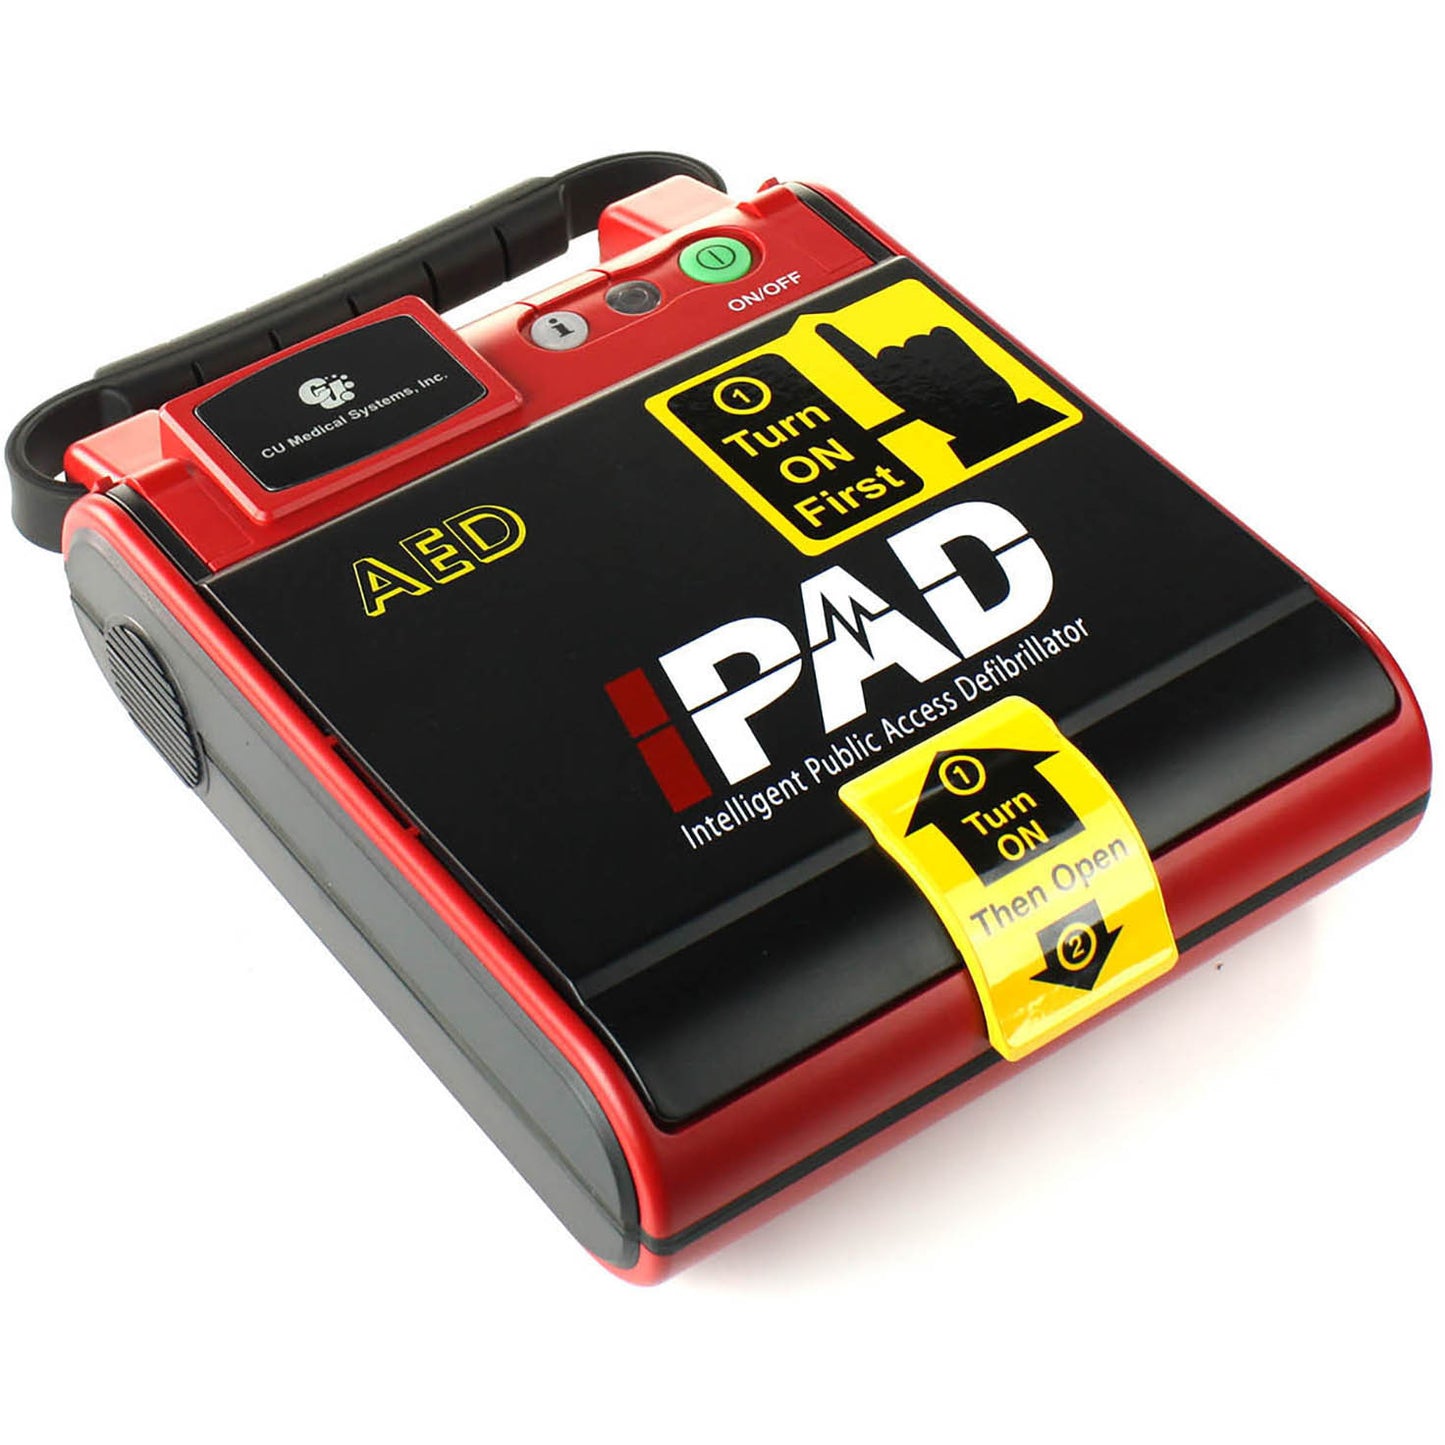 iPAD Saver NF1200 Semi Automatic Defibrillator with Adult Pads - AED